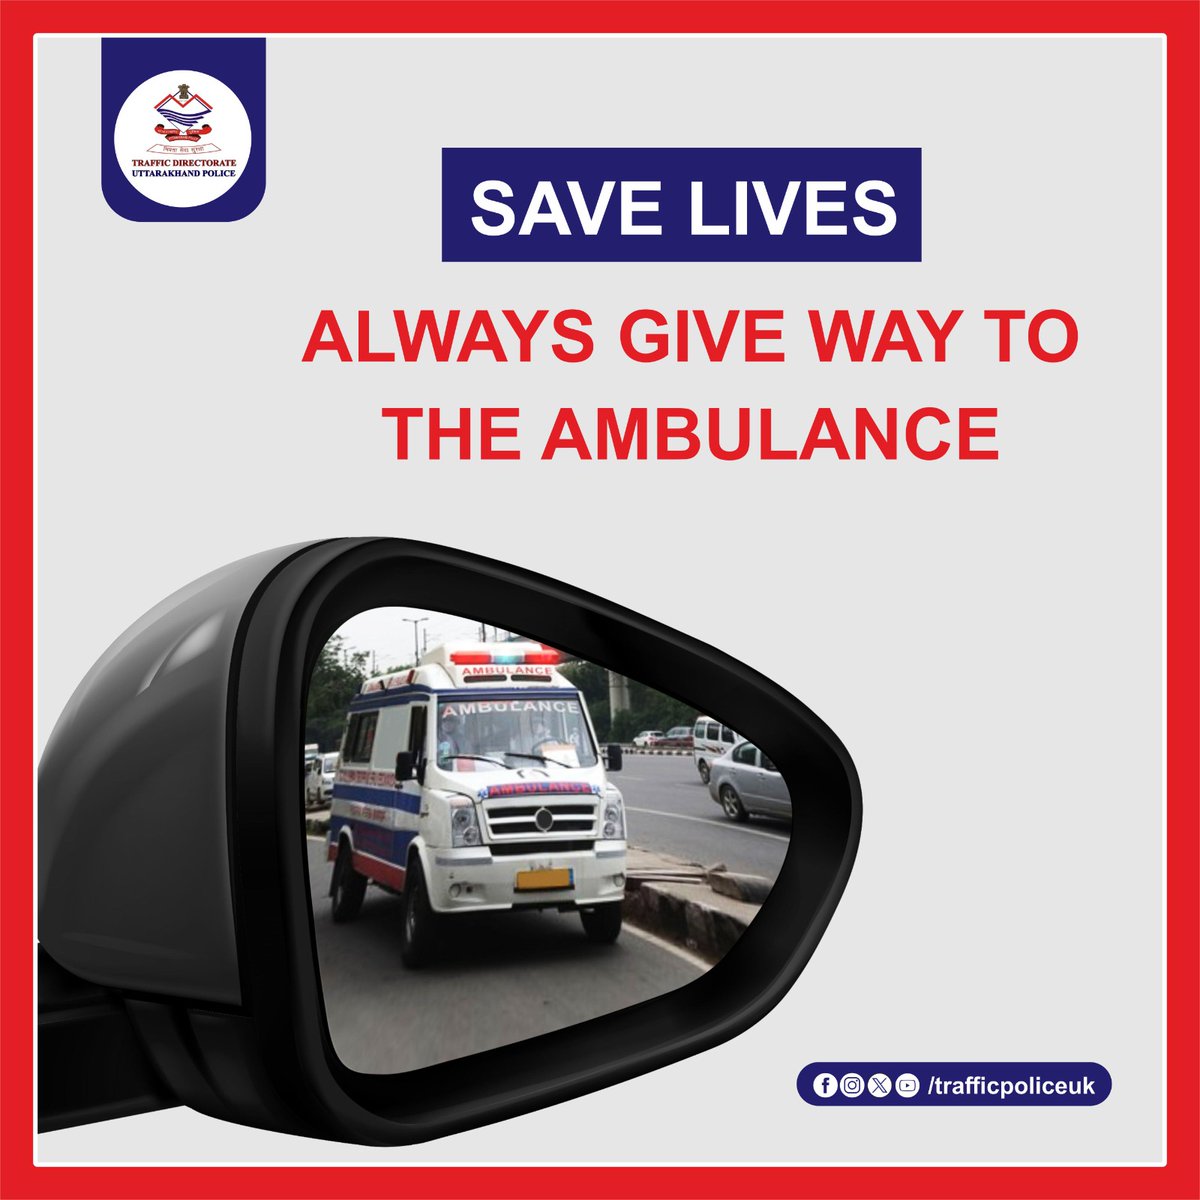 Always give way to the ambulance. Blocking an ambulance delays someone's chance at life.

#ResponsibleCitizen #FollowTrafficPolice #UttarakhandPoliceCares